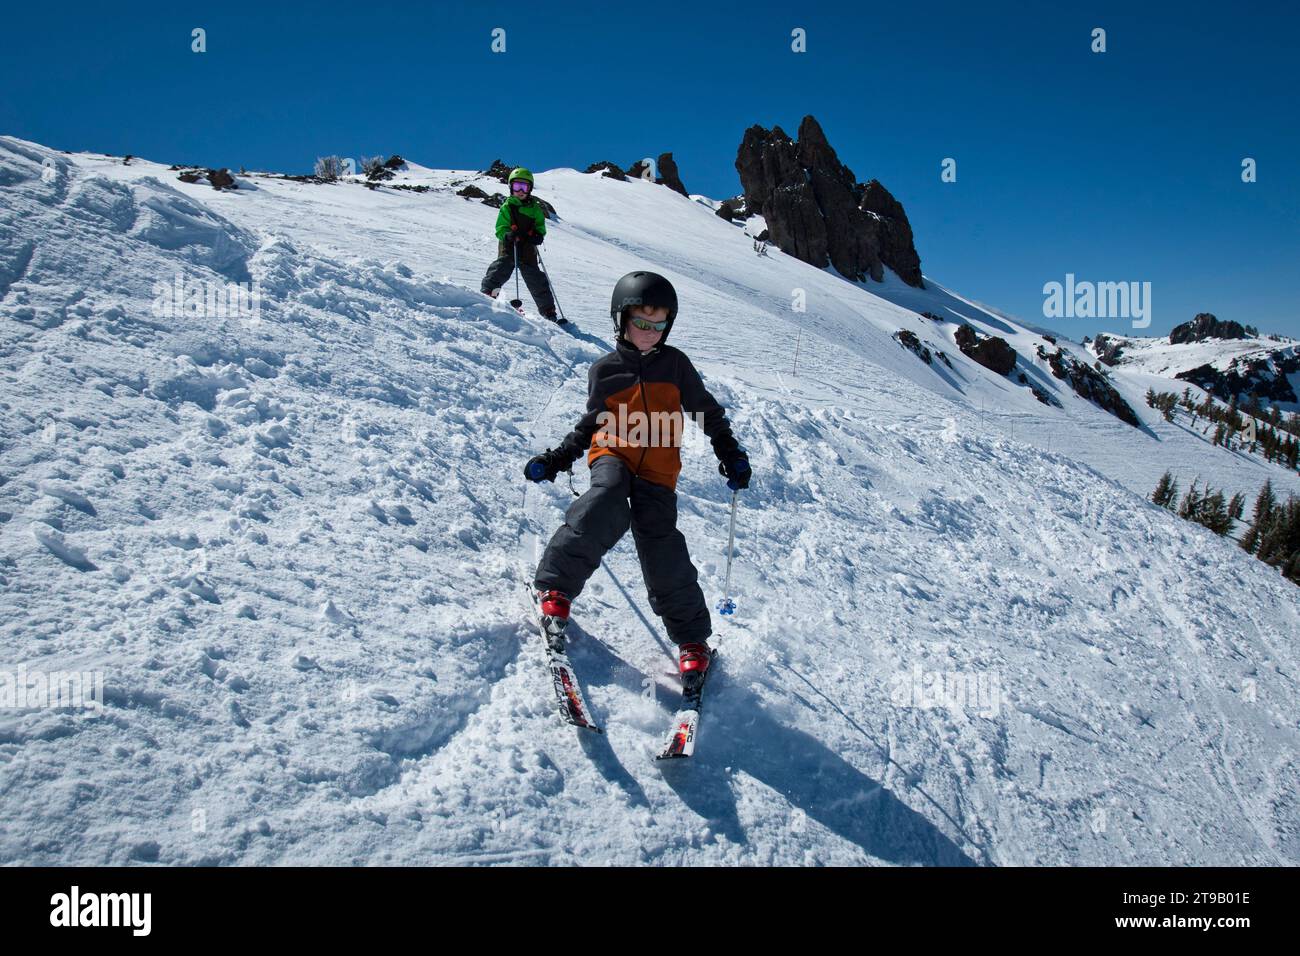 Two young skiers skiing down steep terrain. Stock Photo